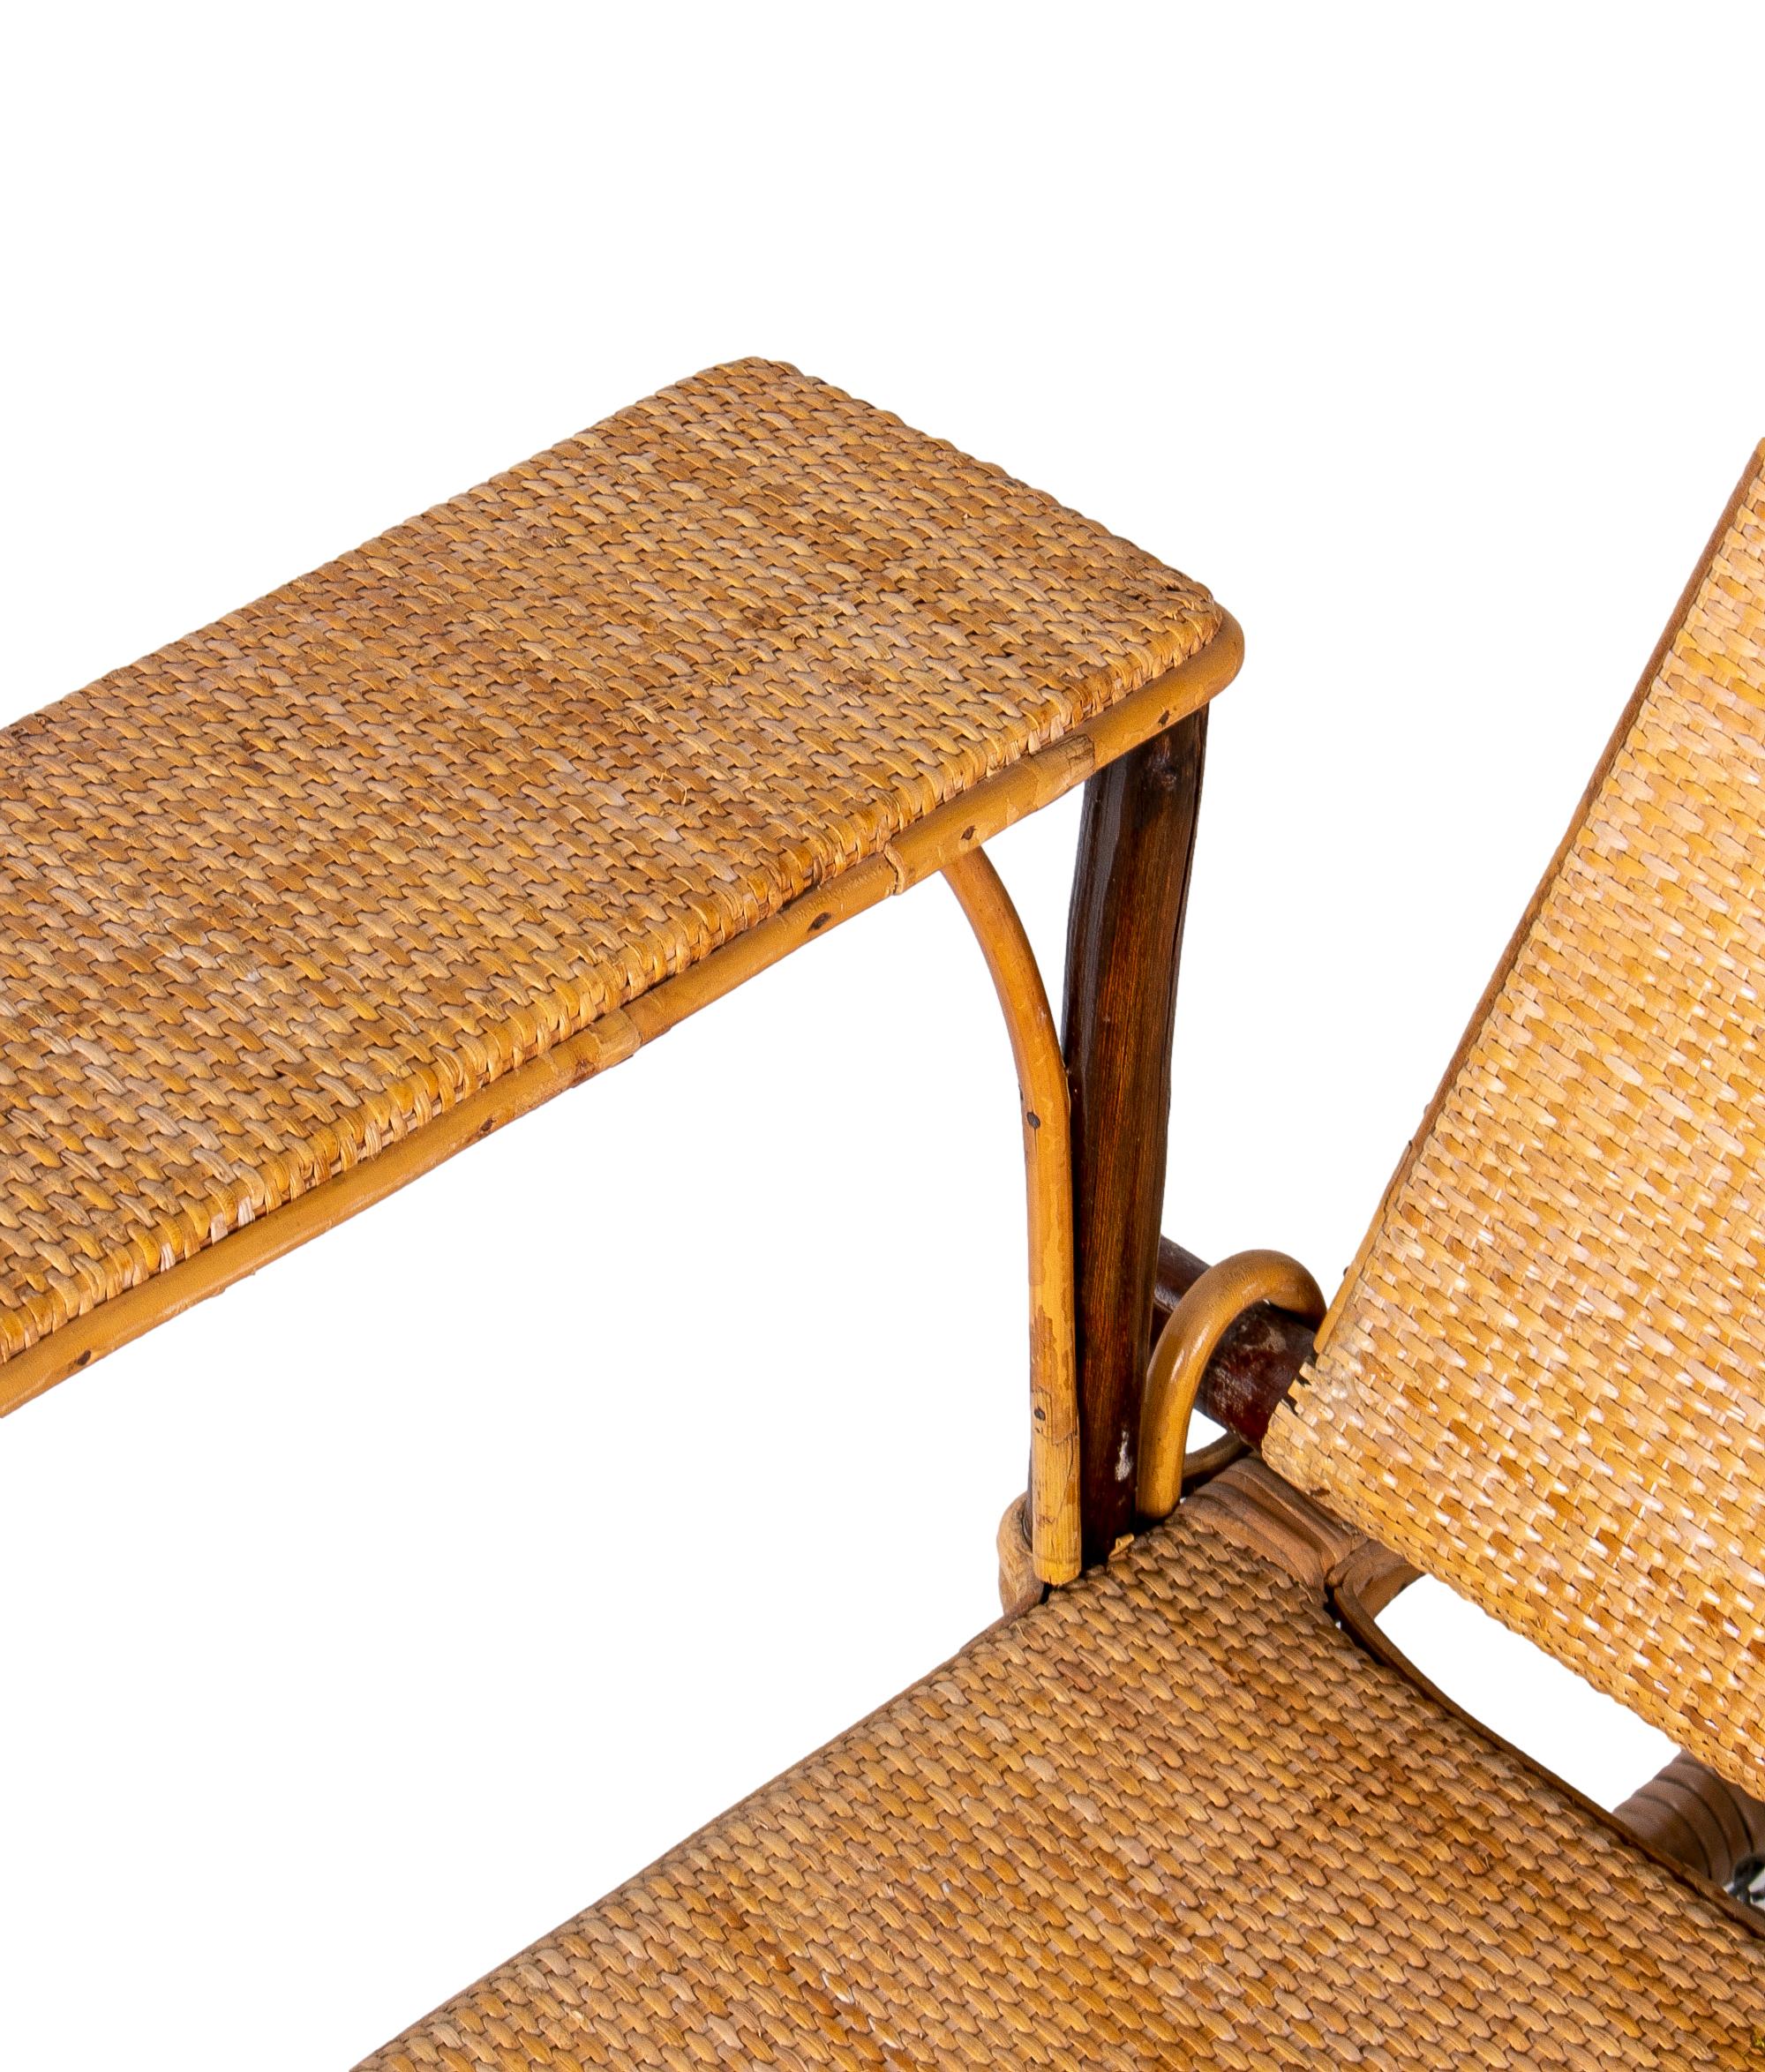 1980s Spanish Woven Wicker & Bamboo Sunbathing Lounge Chair For Sale 3